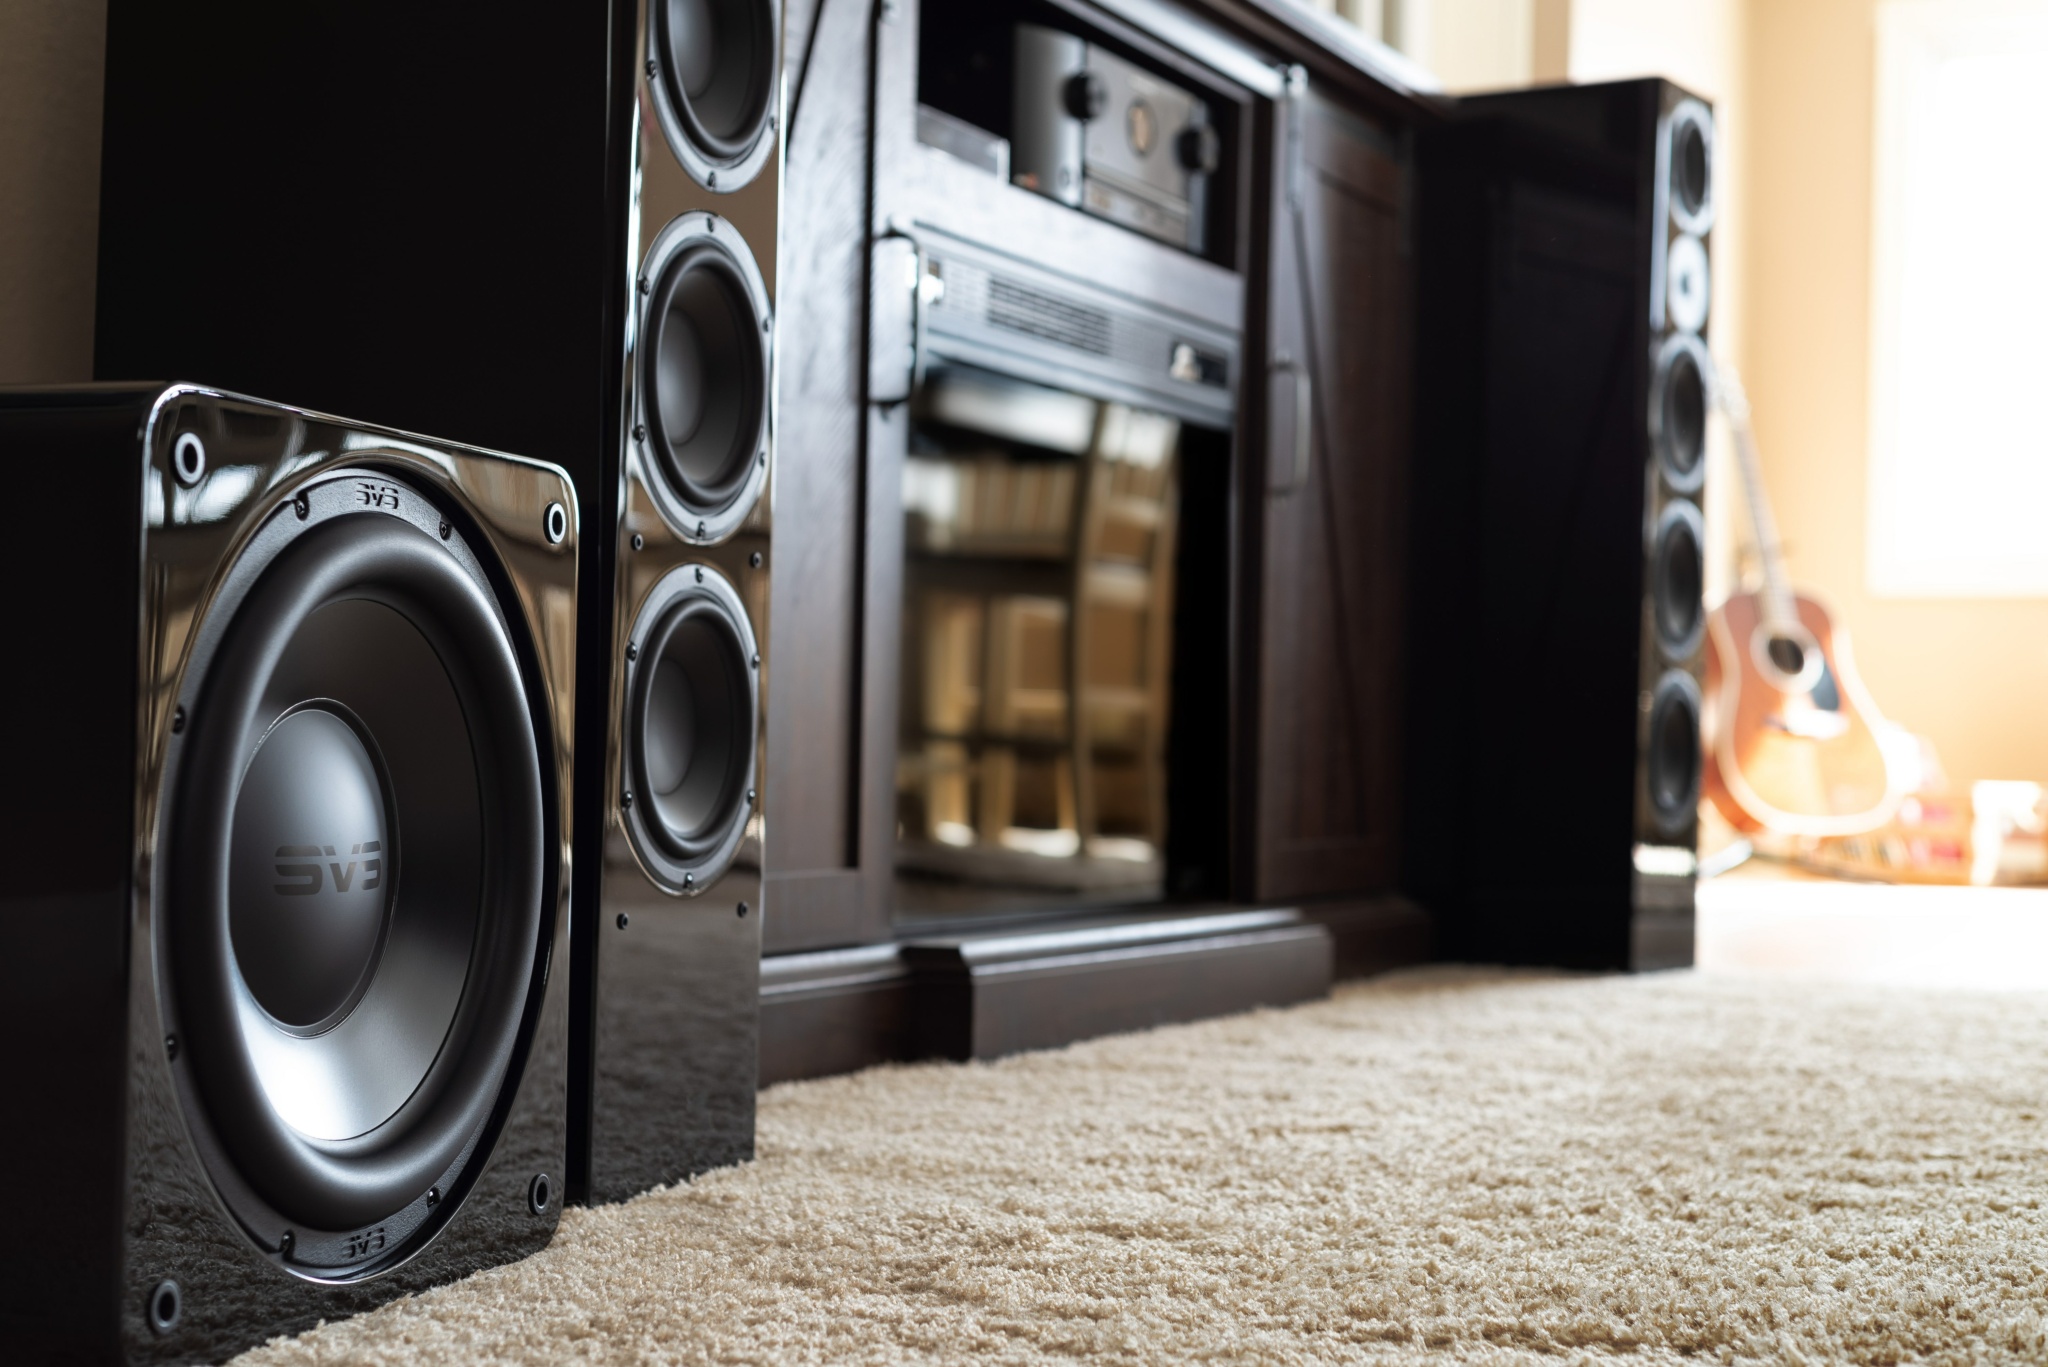 Subwoofer Calibration: Getting the Bass Just Right